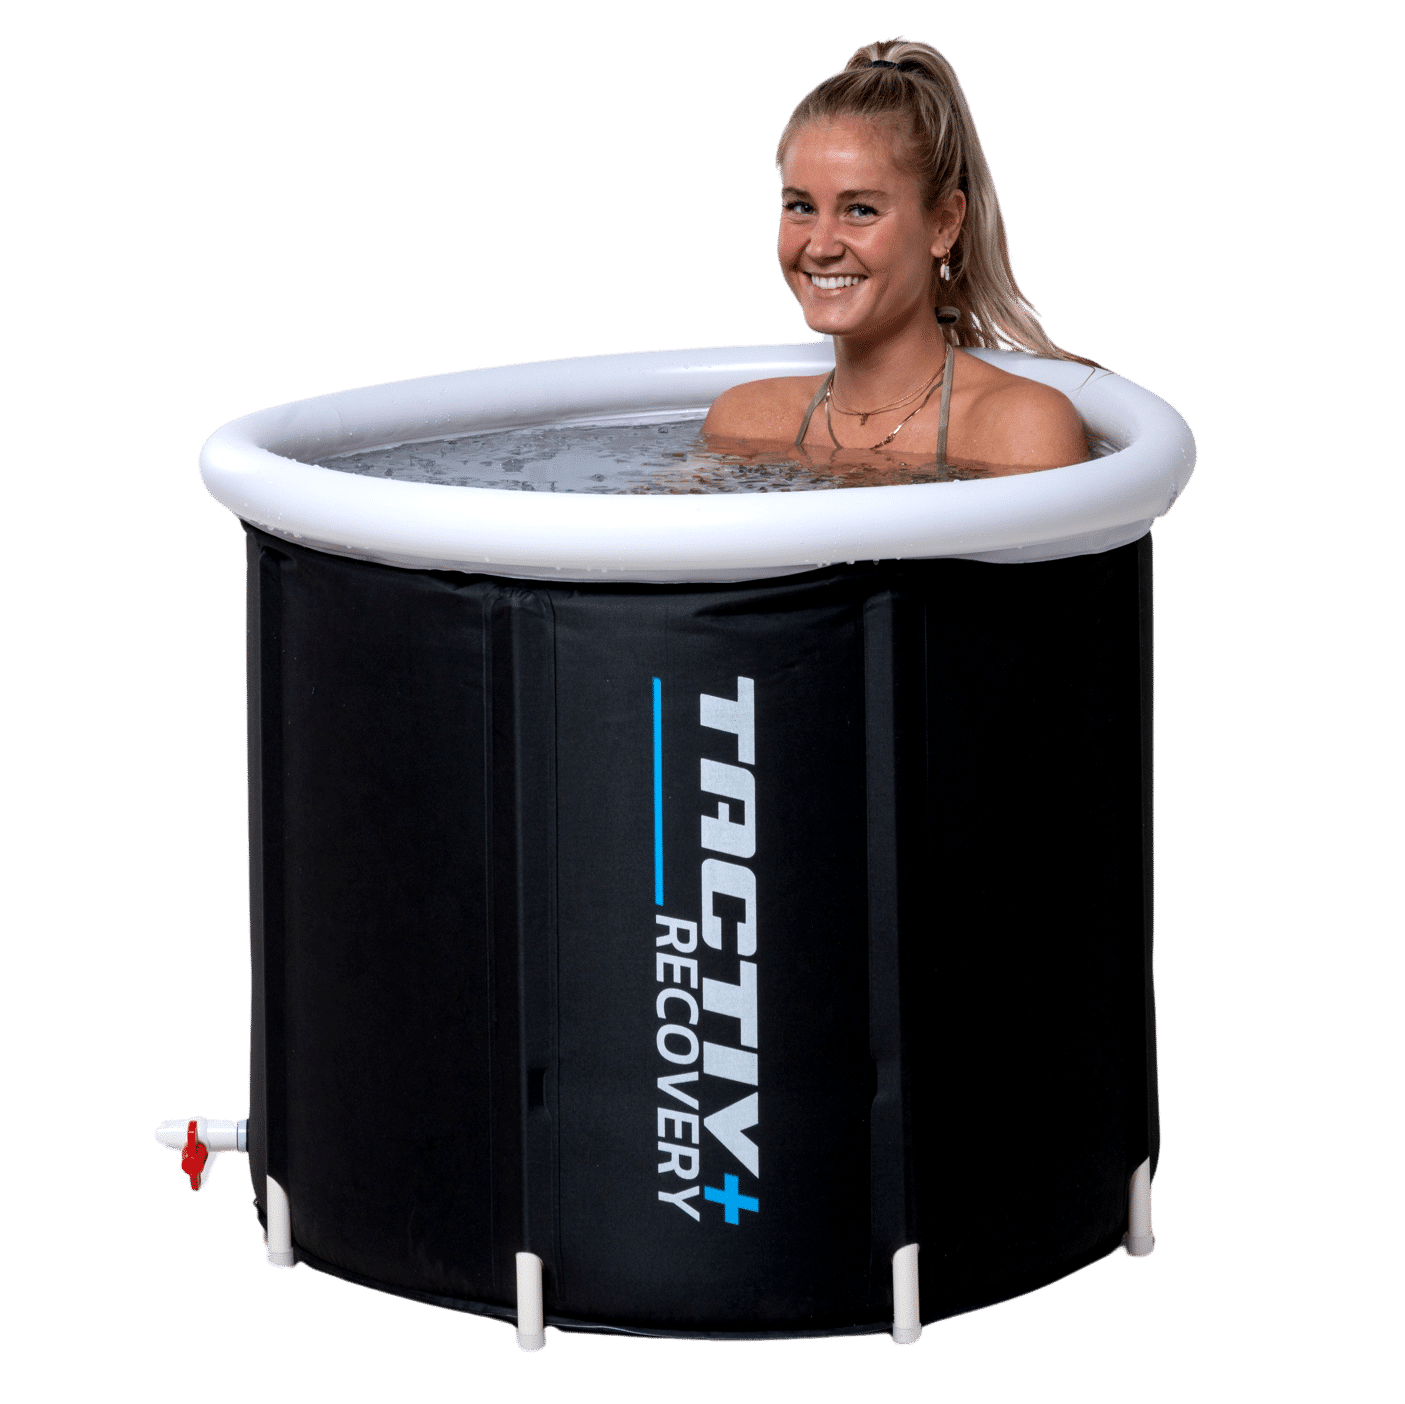 Cold water poured on ice baths as effective recovery for elite